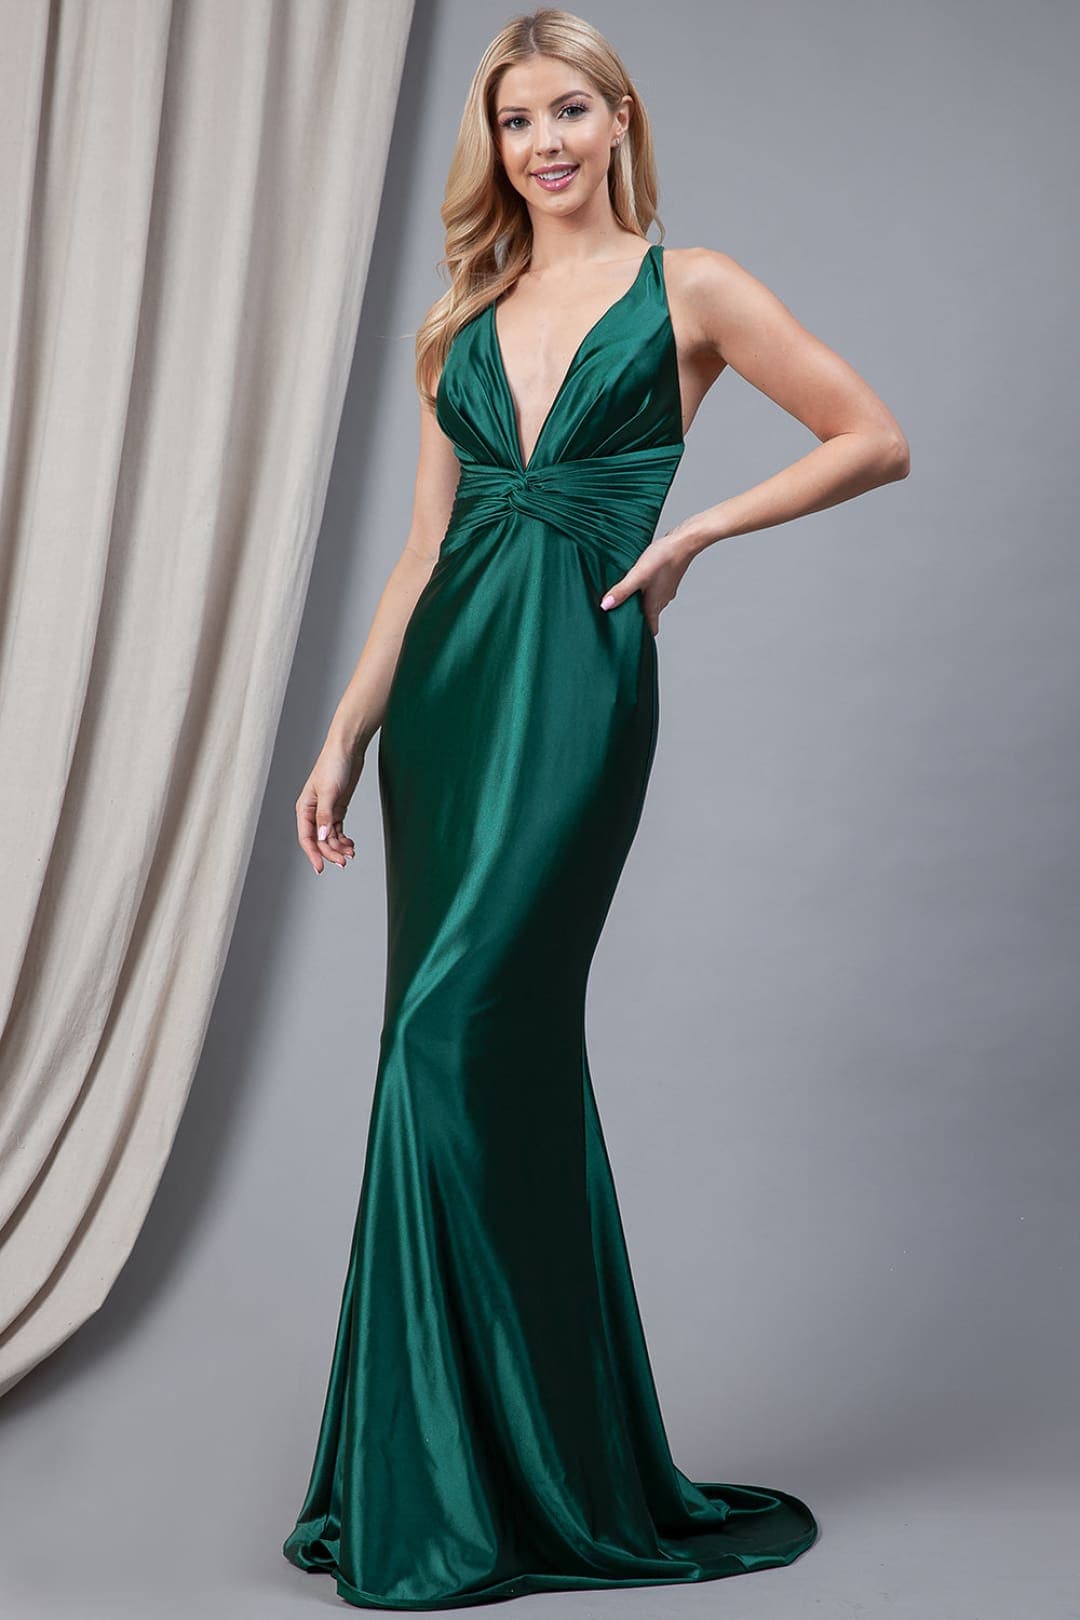 Amelia Couture AC5039 V-neck Open Back Prom Gown - Emerald Green / 2